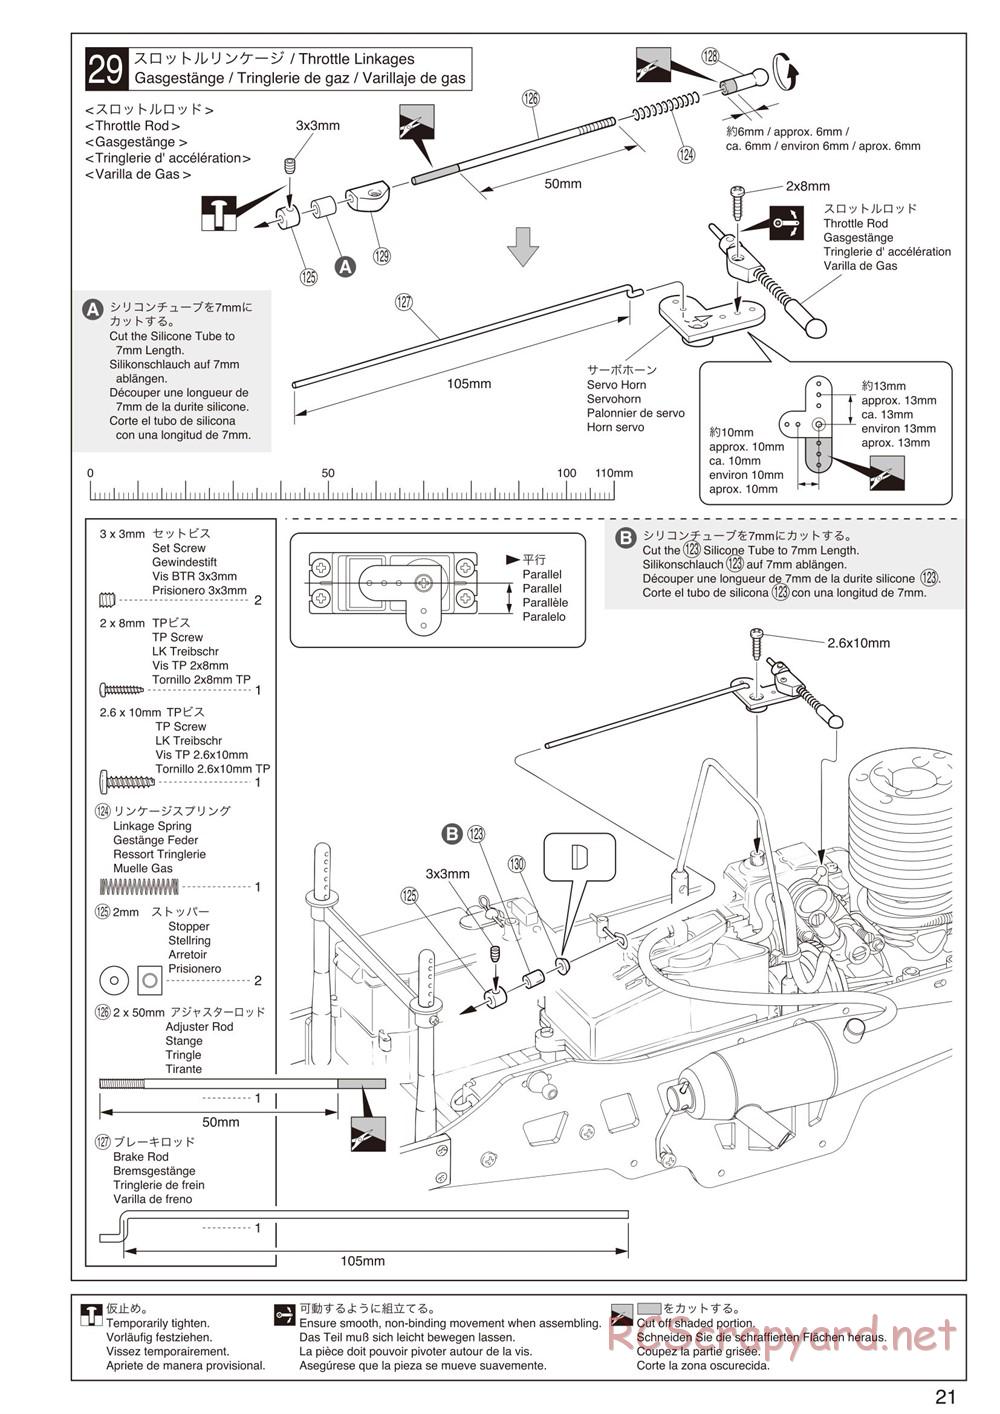 Kyosho - Mad Force Cruiser - Manual - Page 21